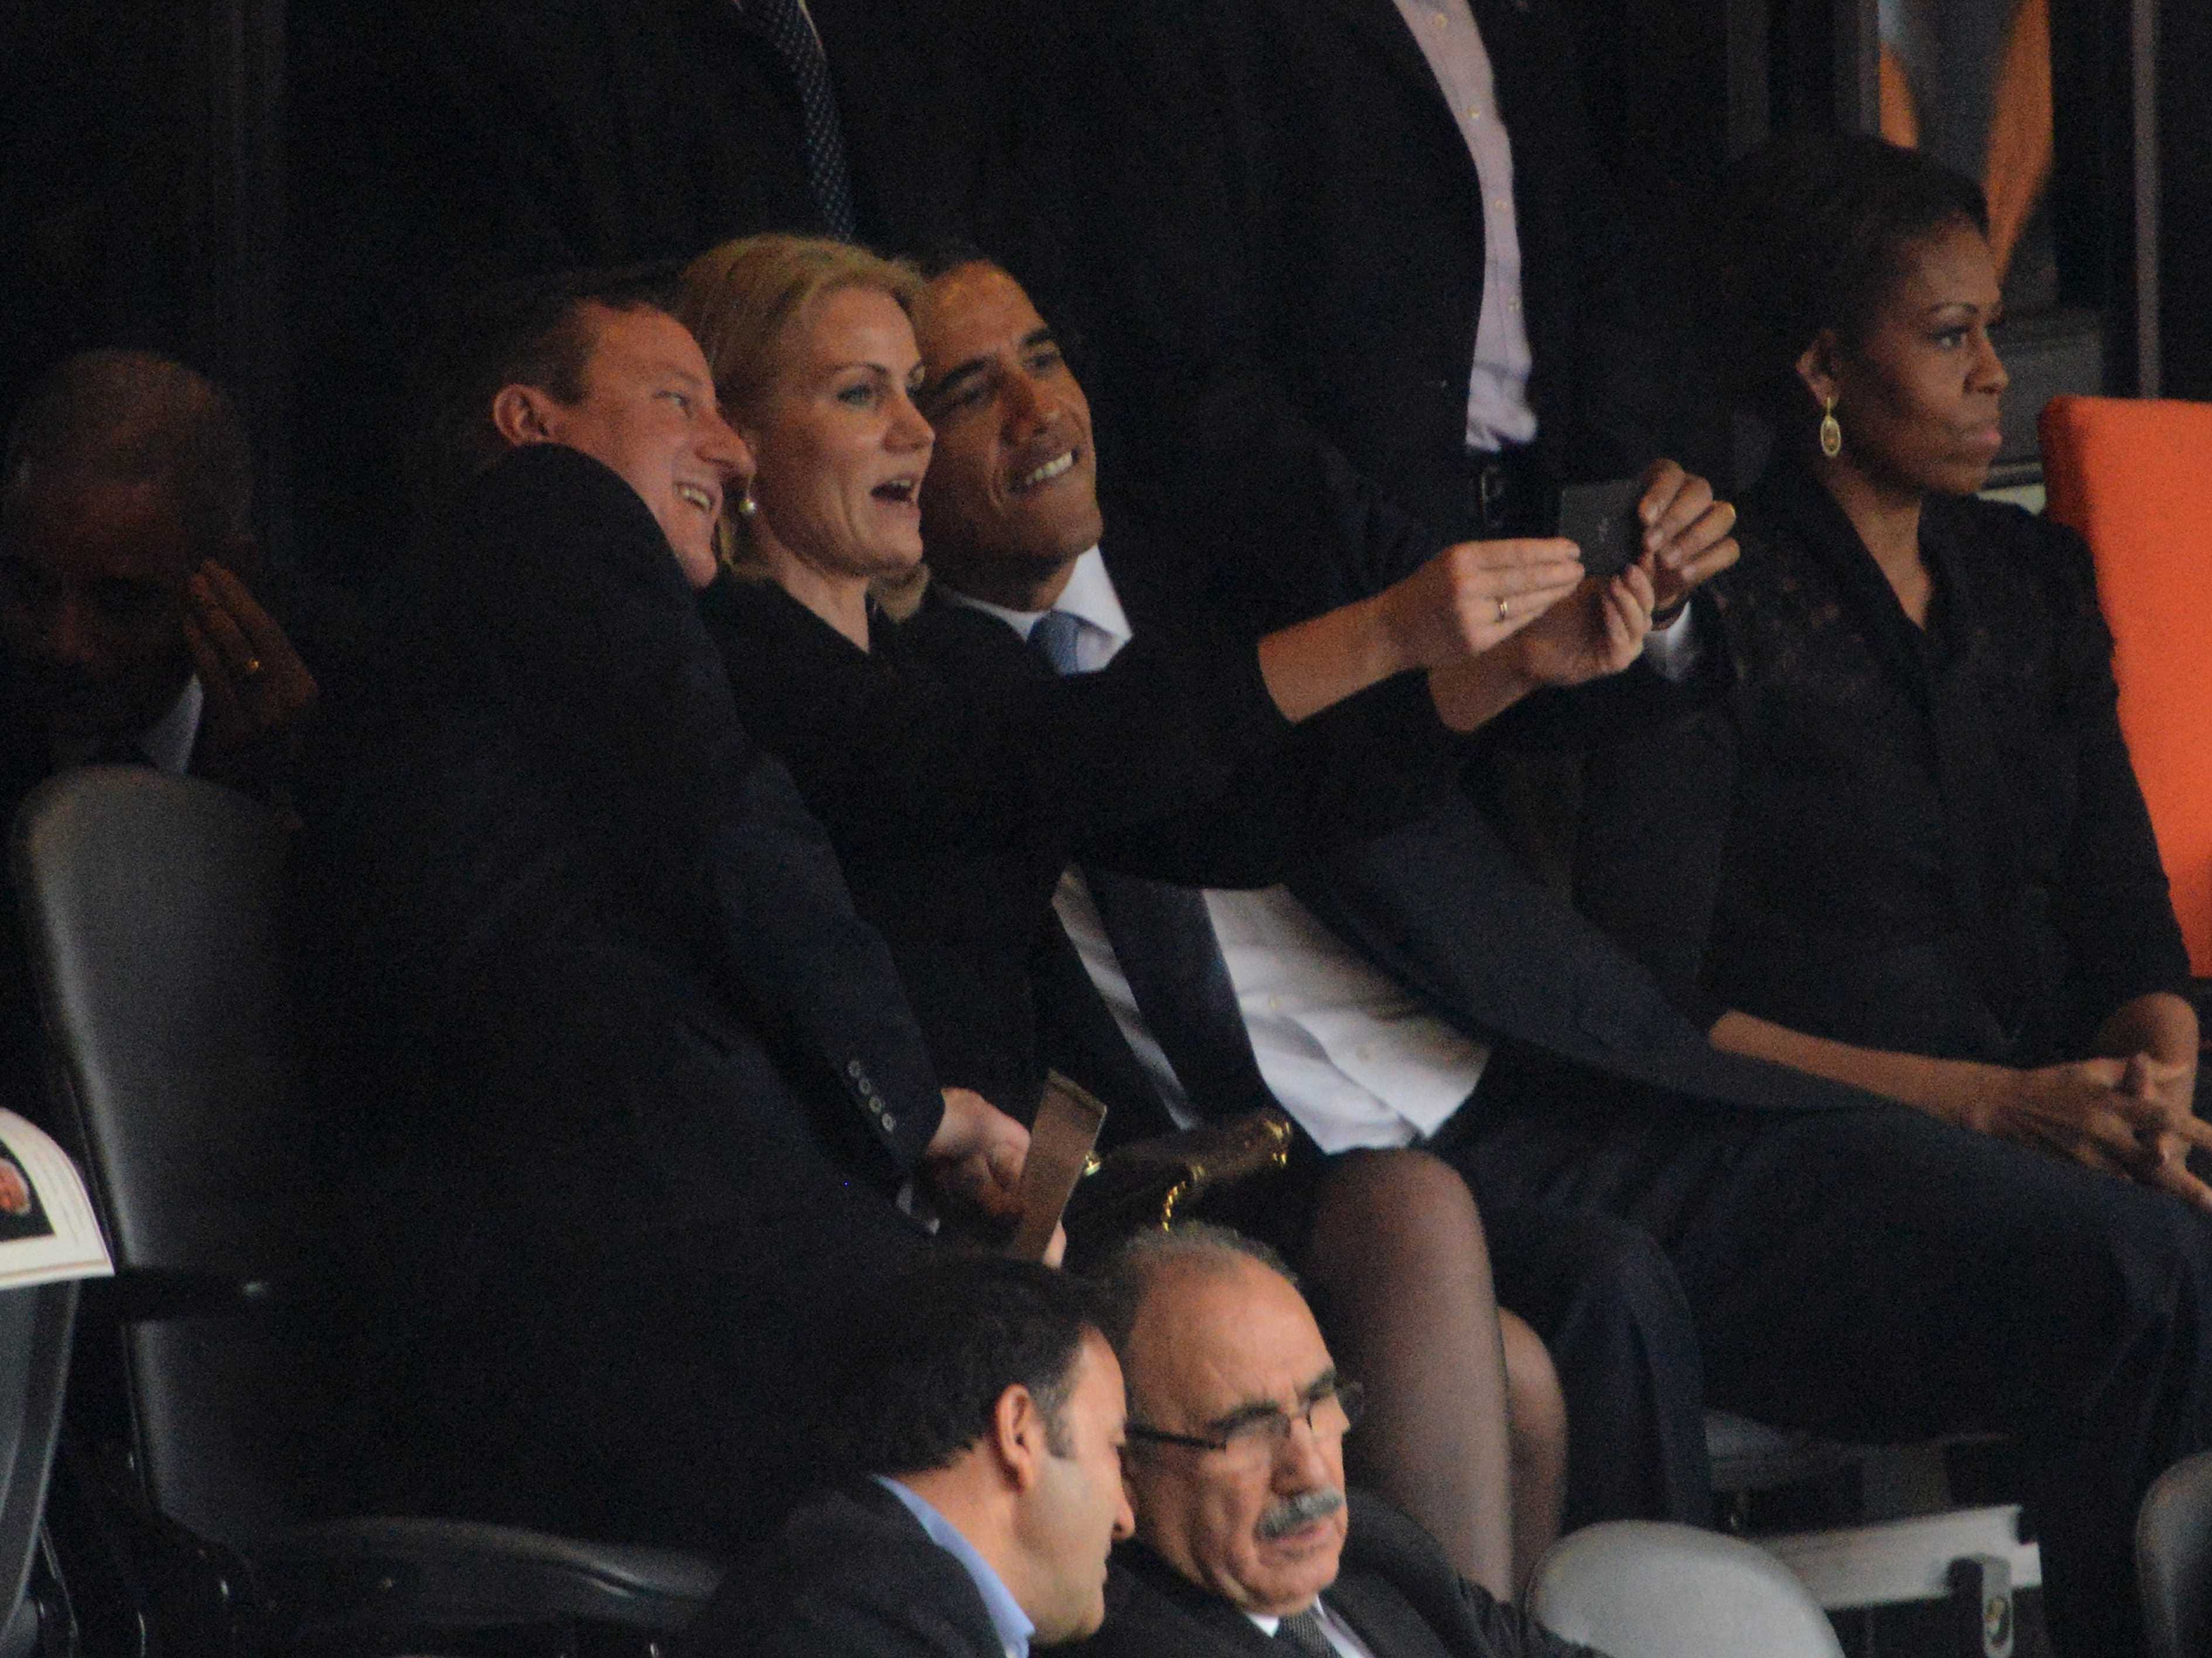 heres-obama-taking-a-selfie-with-david-cameron-and-denmarks-prime-minister-at-mandelas-memorial-service.jpg